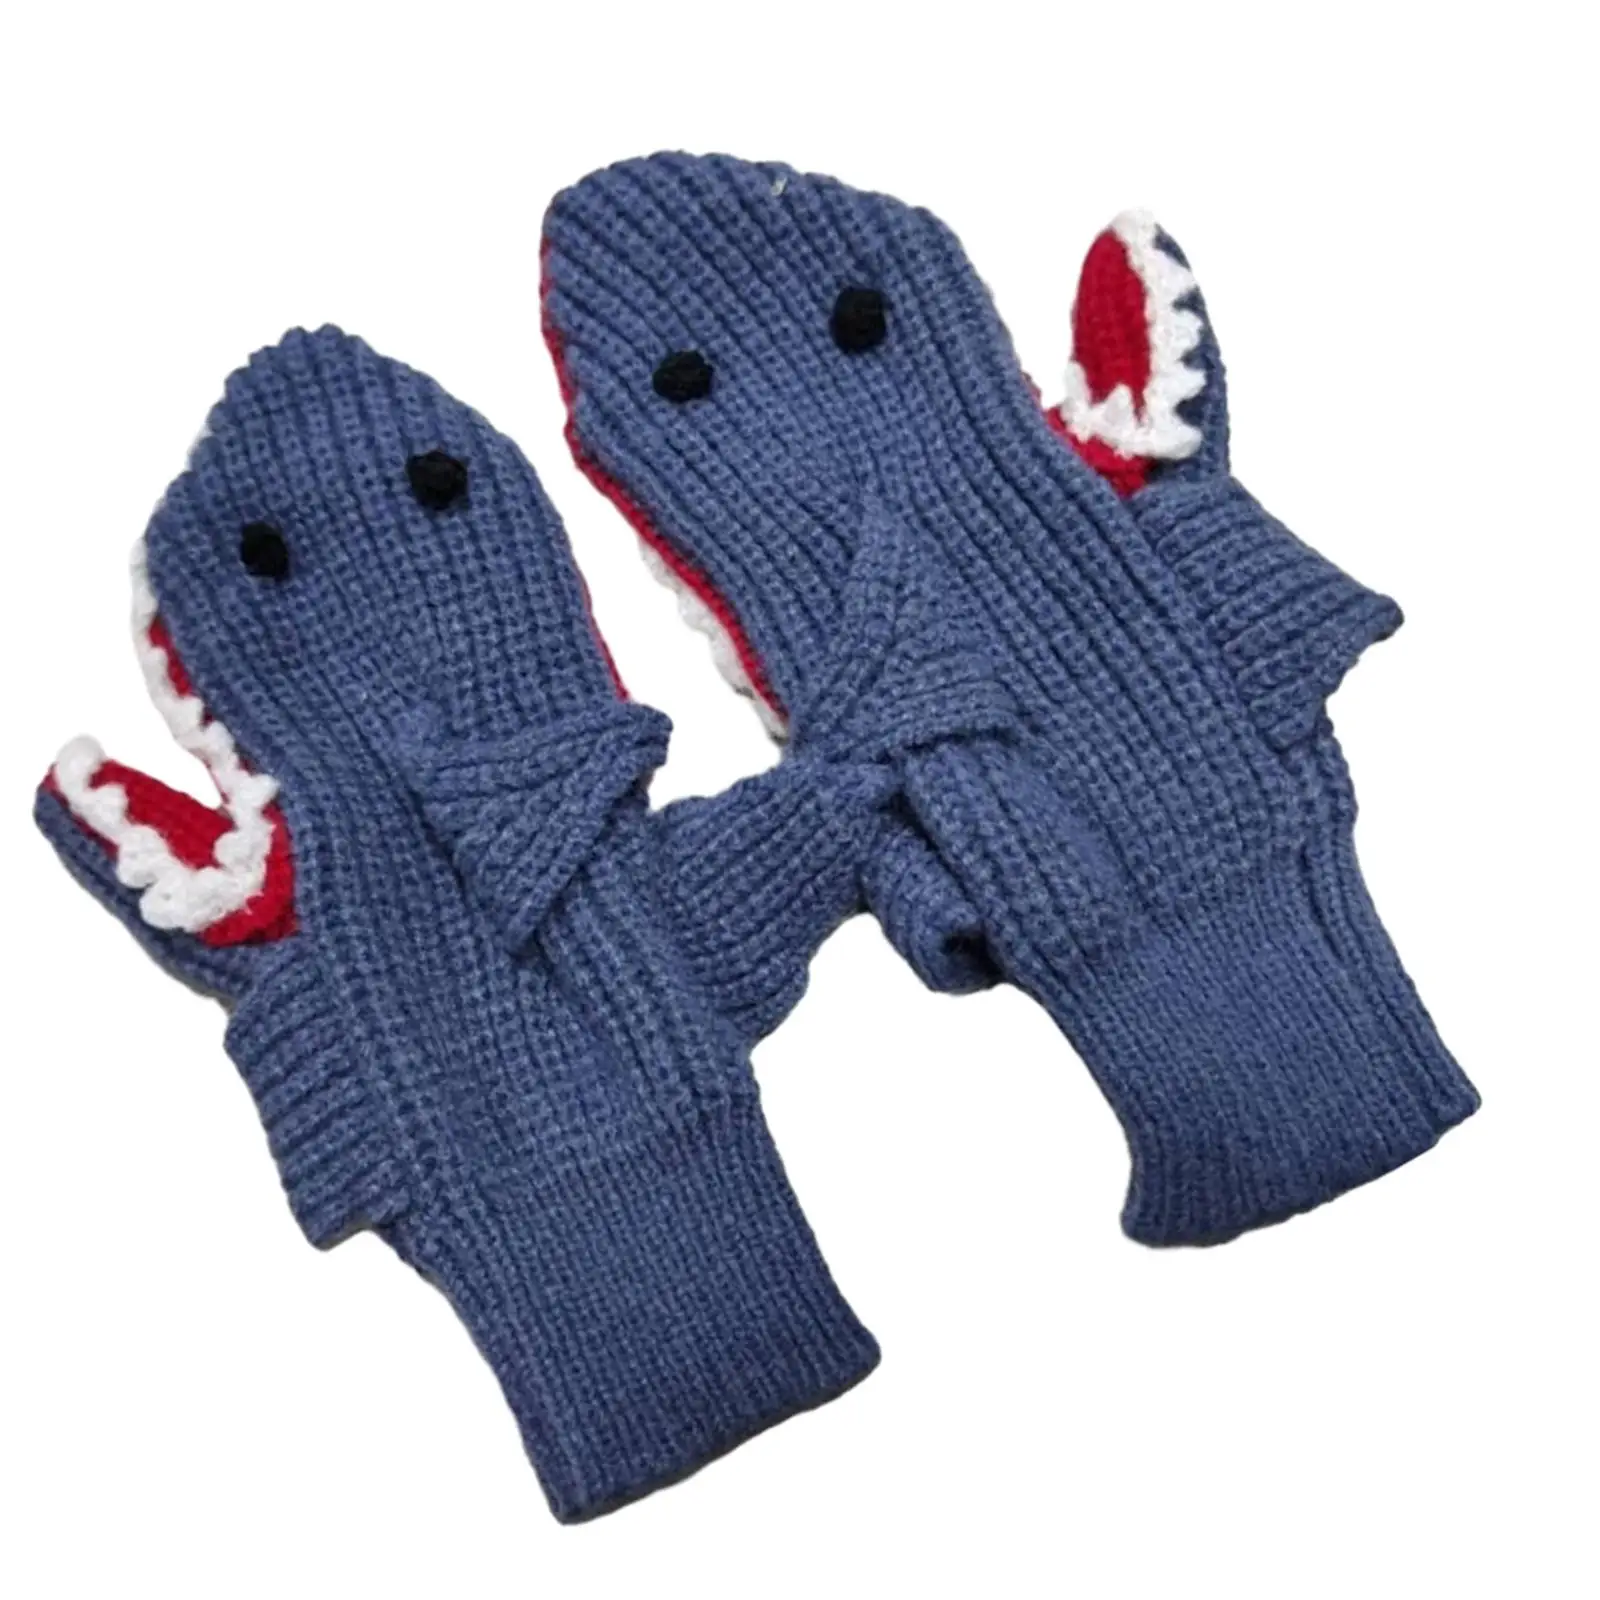 

Shark Gloves Stretch Cuff Thick Winter Warm Gloves Knitted Glove Mitten Gloves for Running Skiing Christmas Cold Weather Hiking